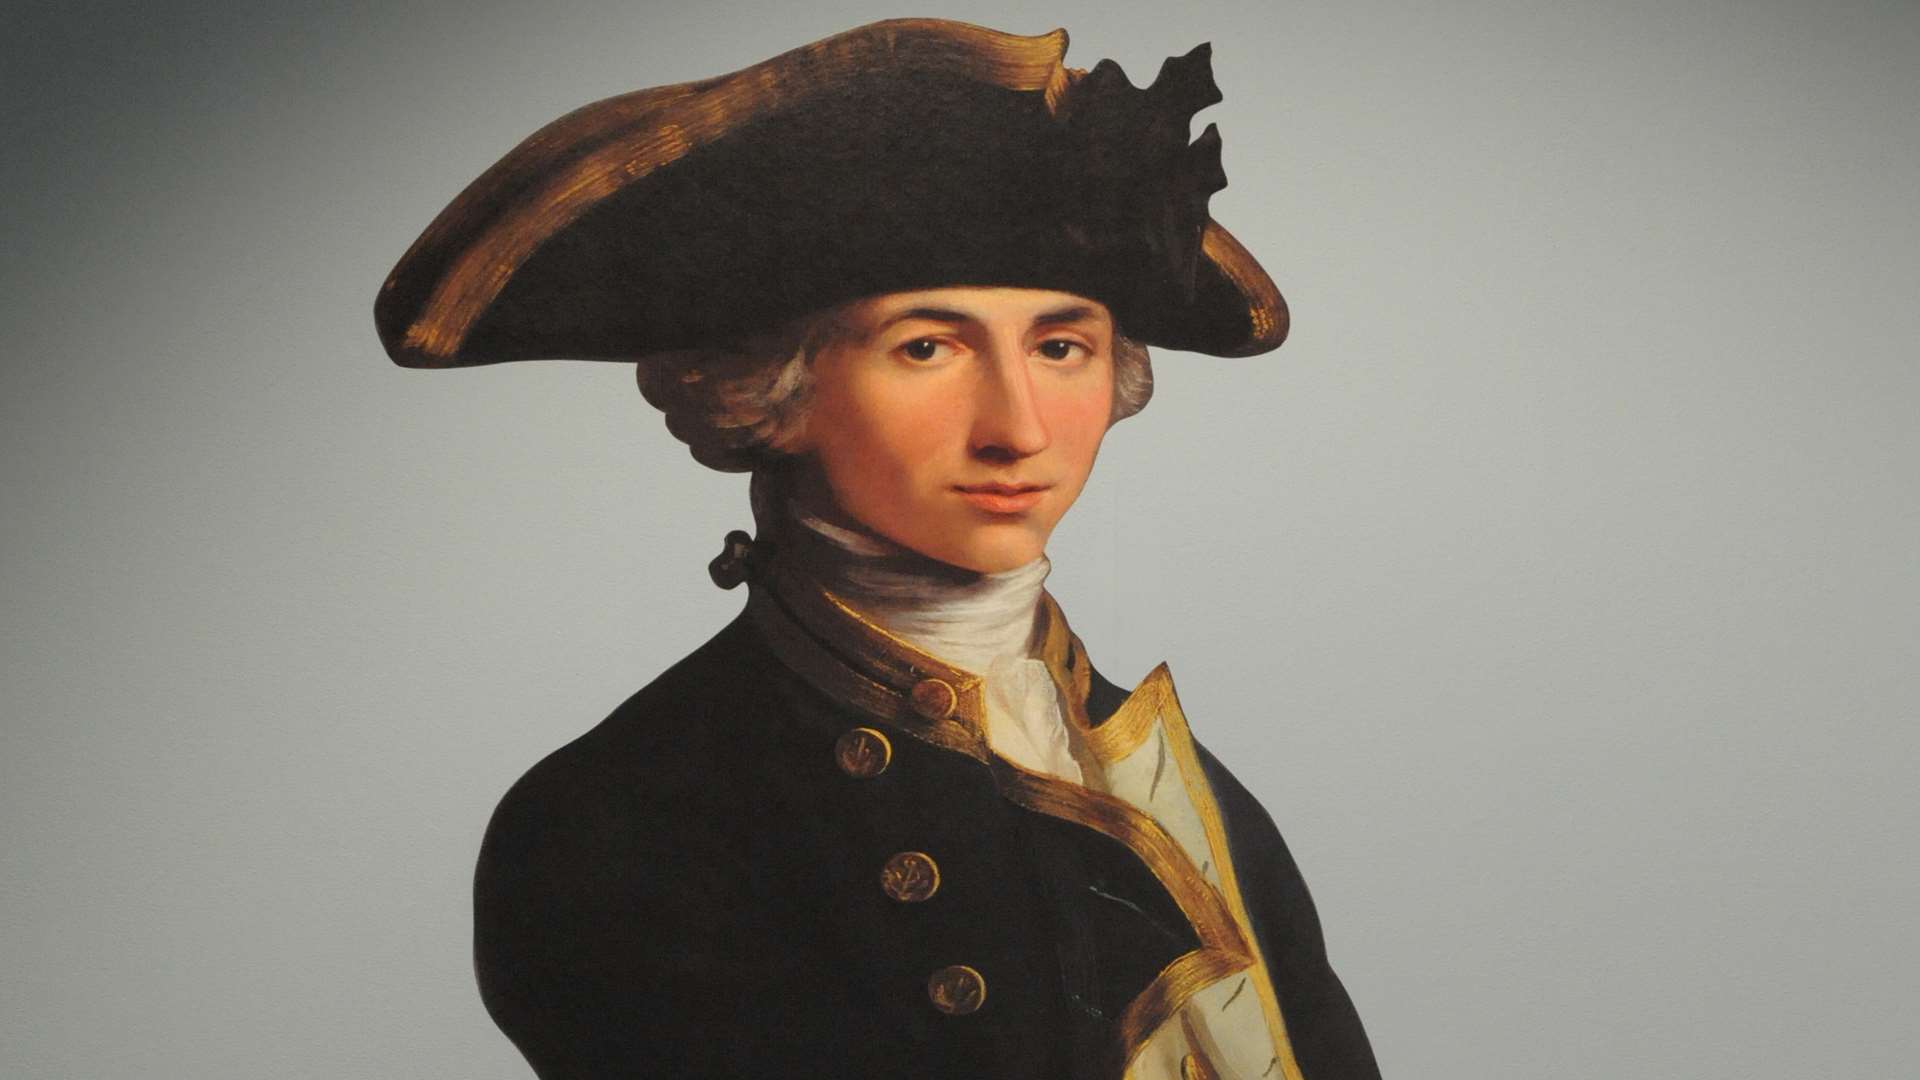 `England expects that every man will do his duty' Horatio Nelson